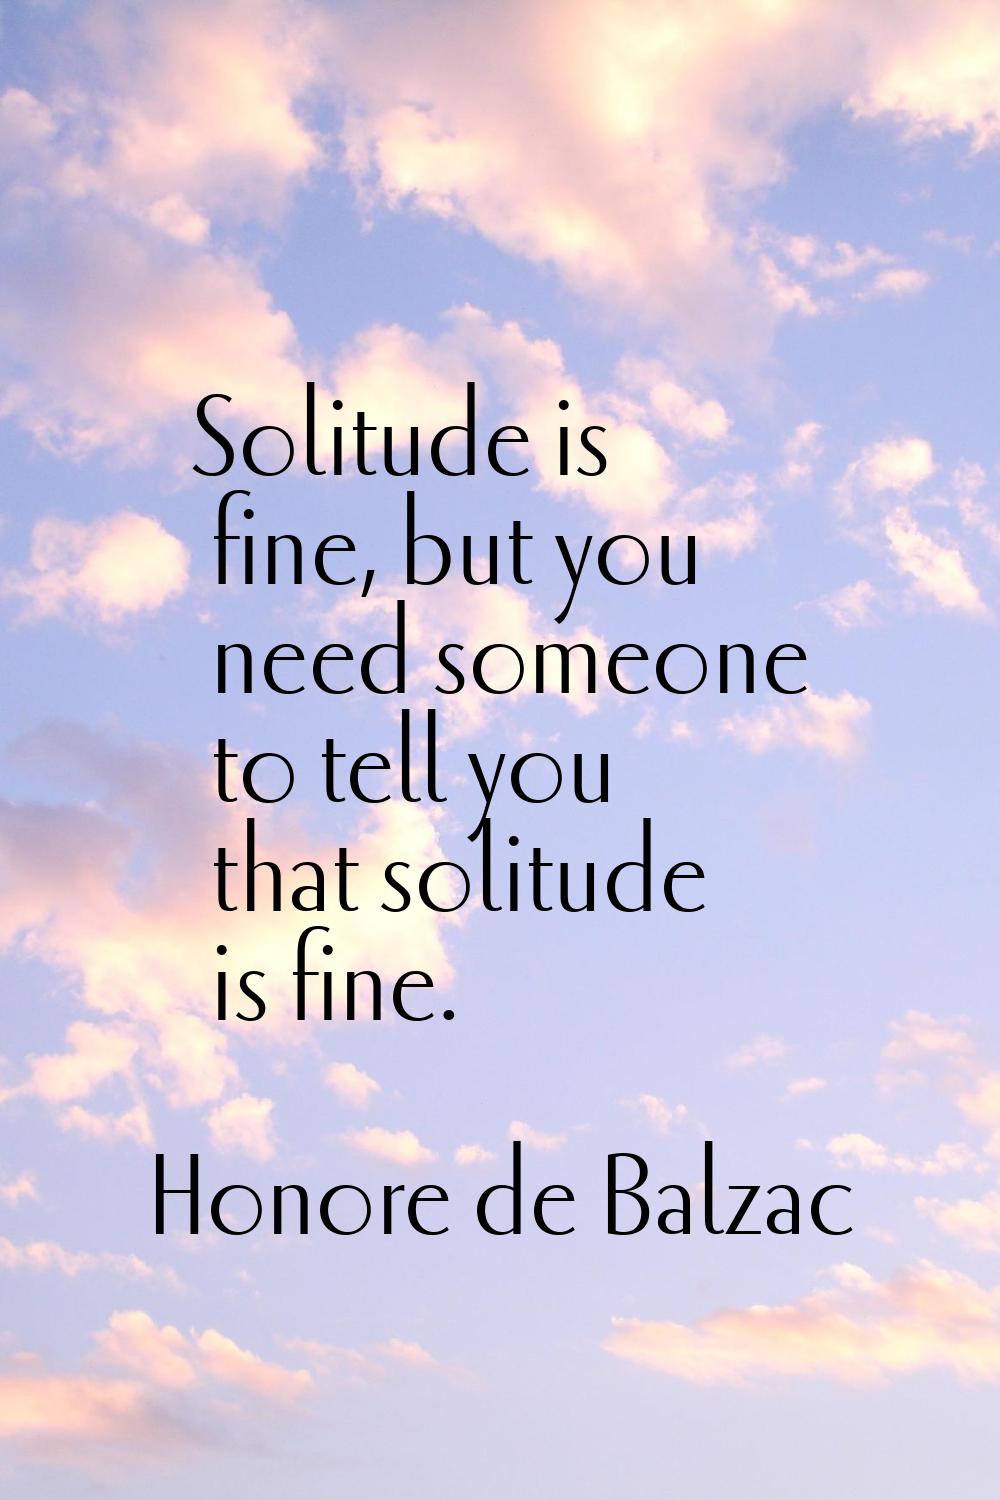 Solitude is fine, but you need someone to tell you that solitude is fine.